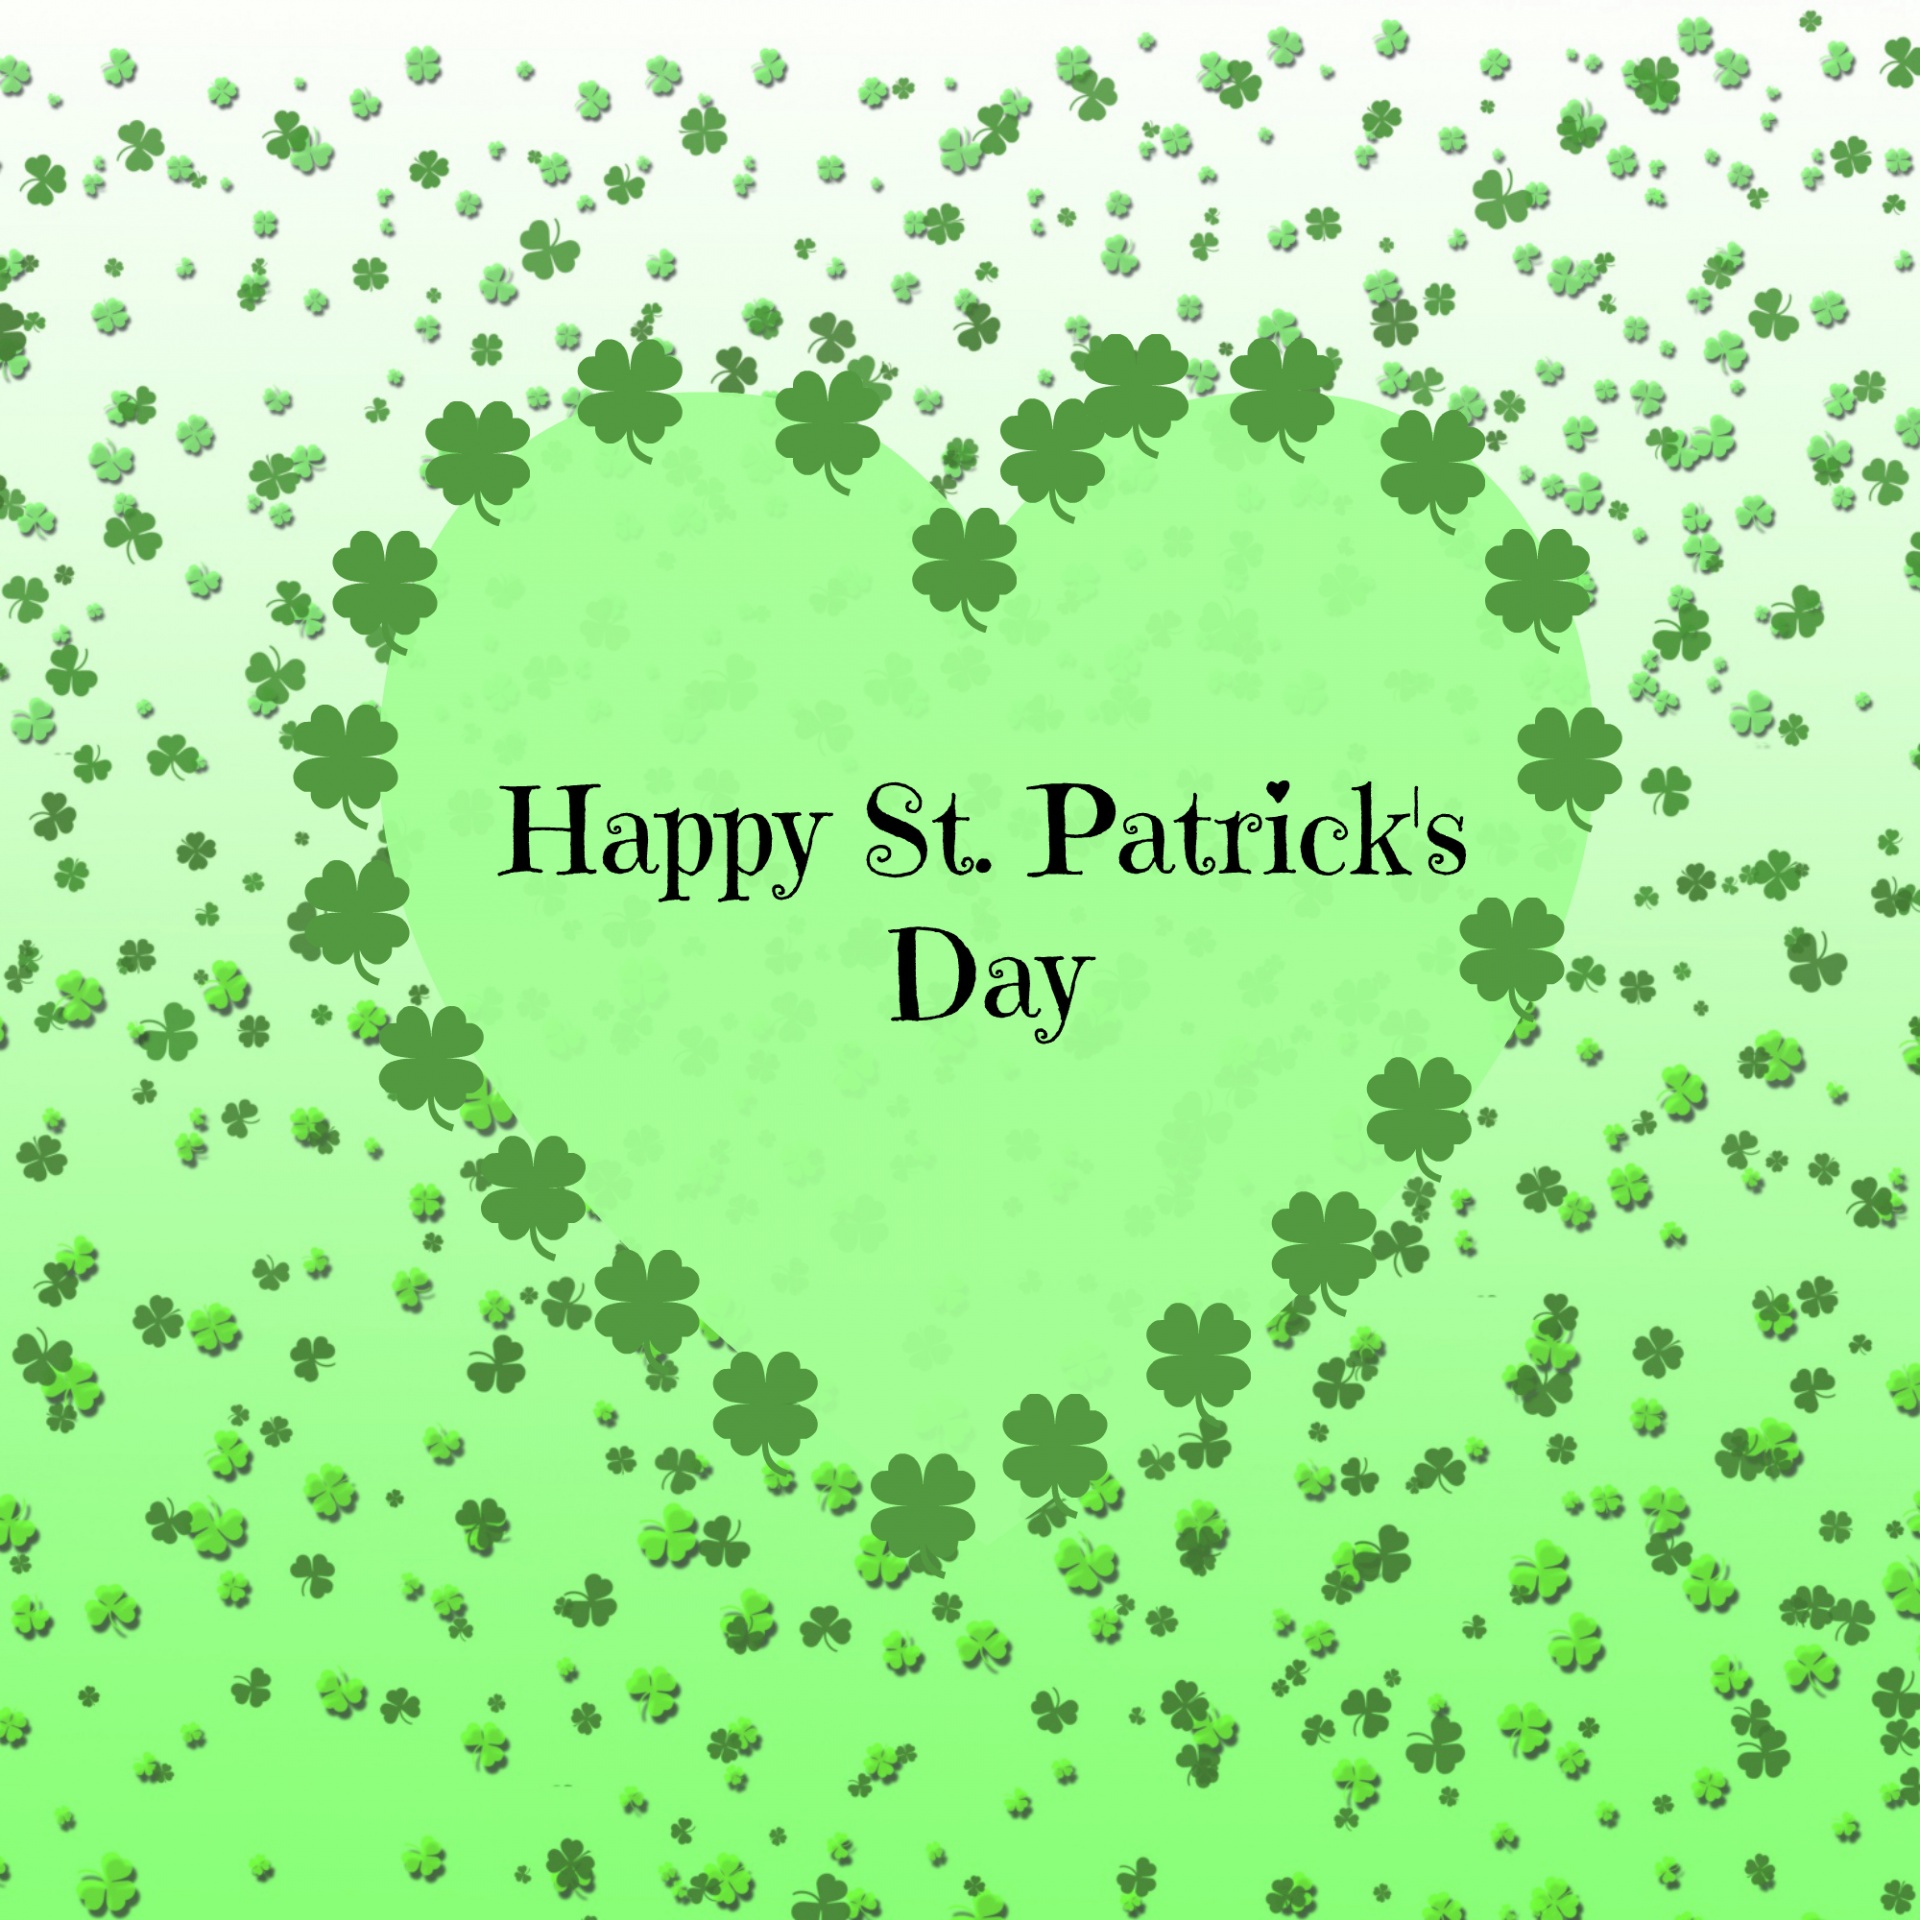 7 Happy St. Patrick's Day Images to Post on Social Media ...